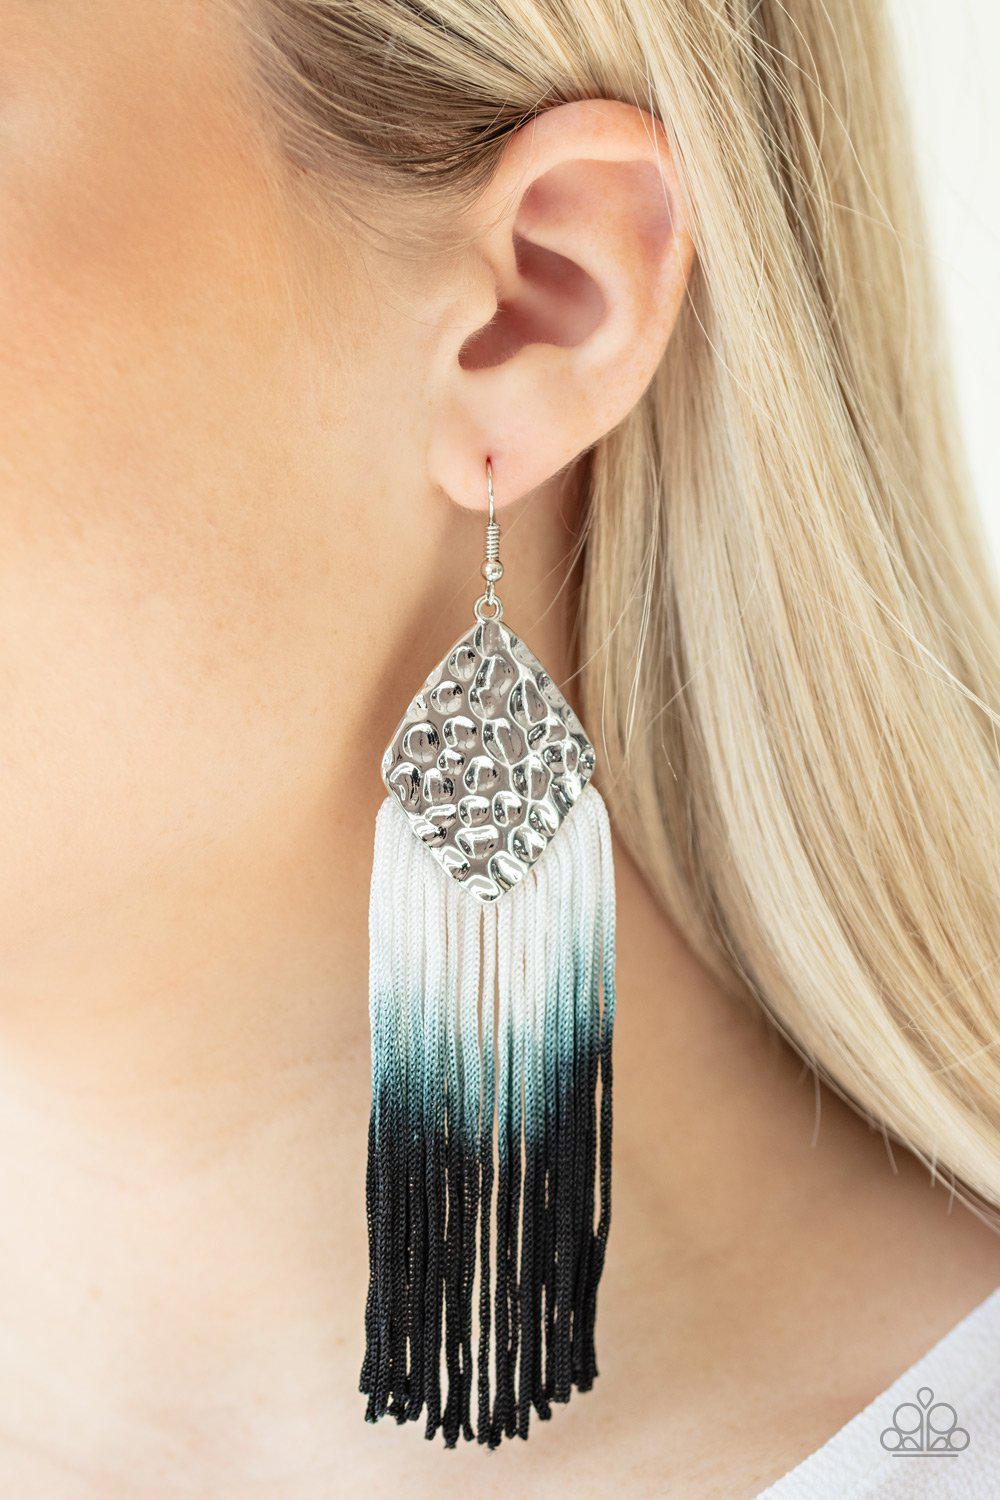 Dip In Black and Silver Ombre Tassel Earrings - Paparazzi Accessories-CarasShop.com - $5 Jewelry by Cara Jewels